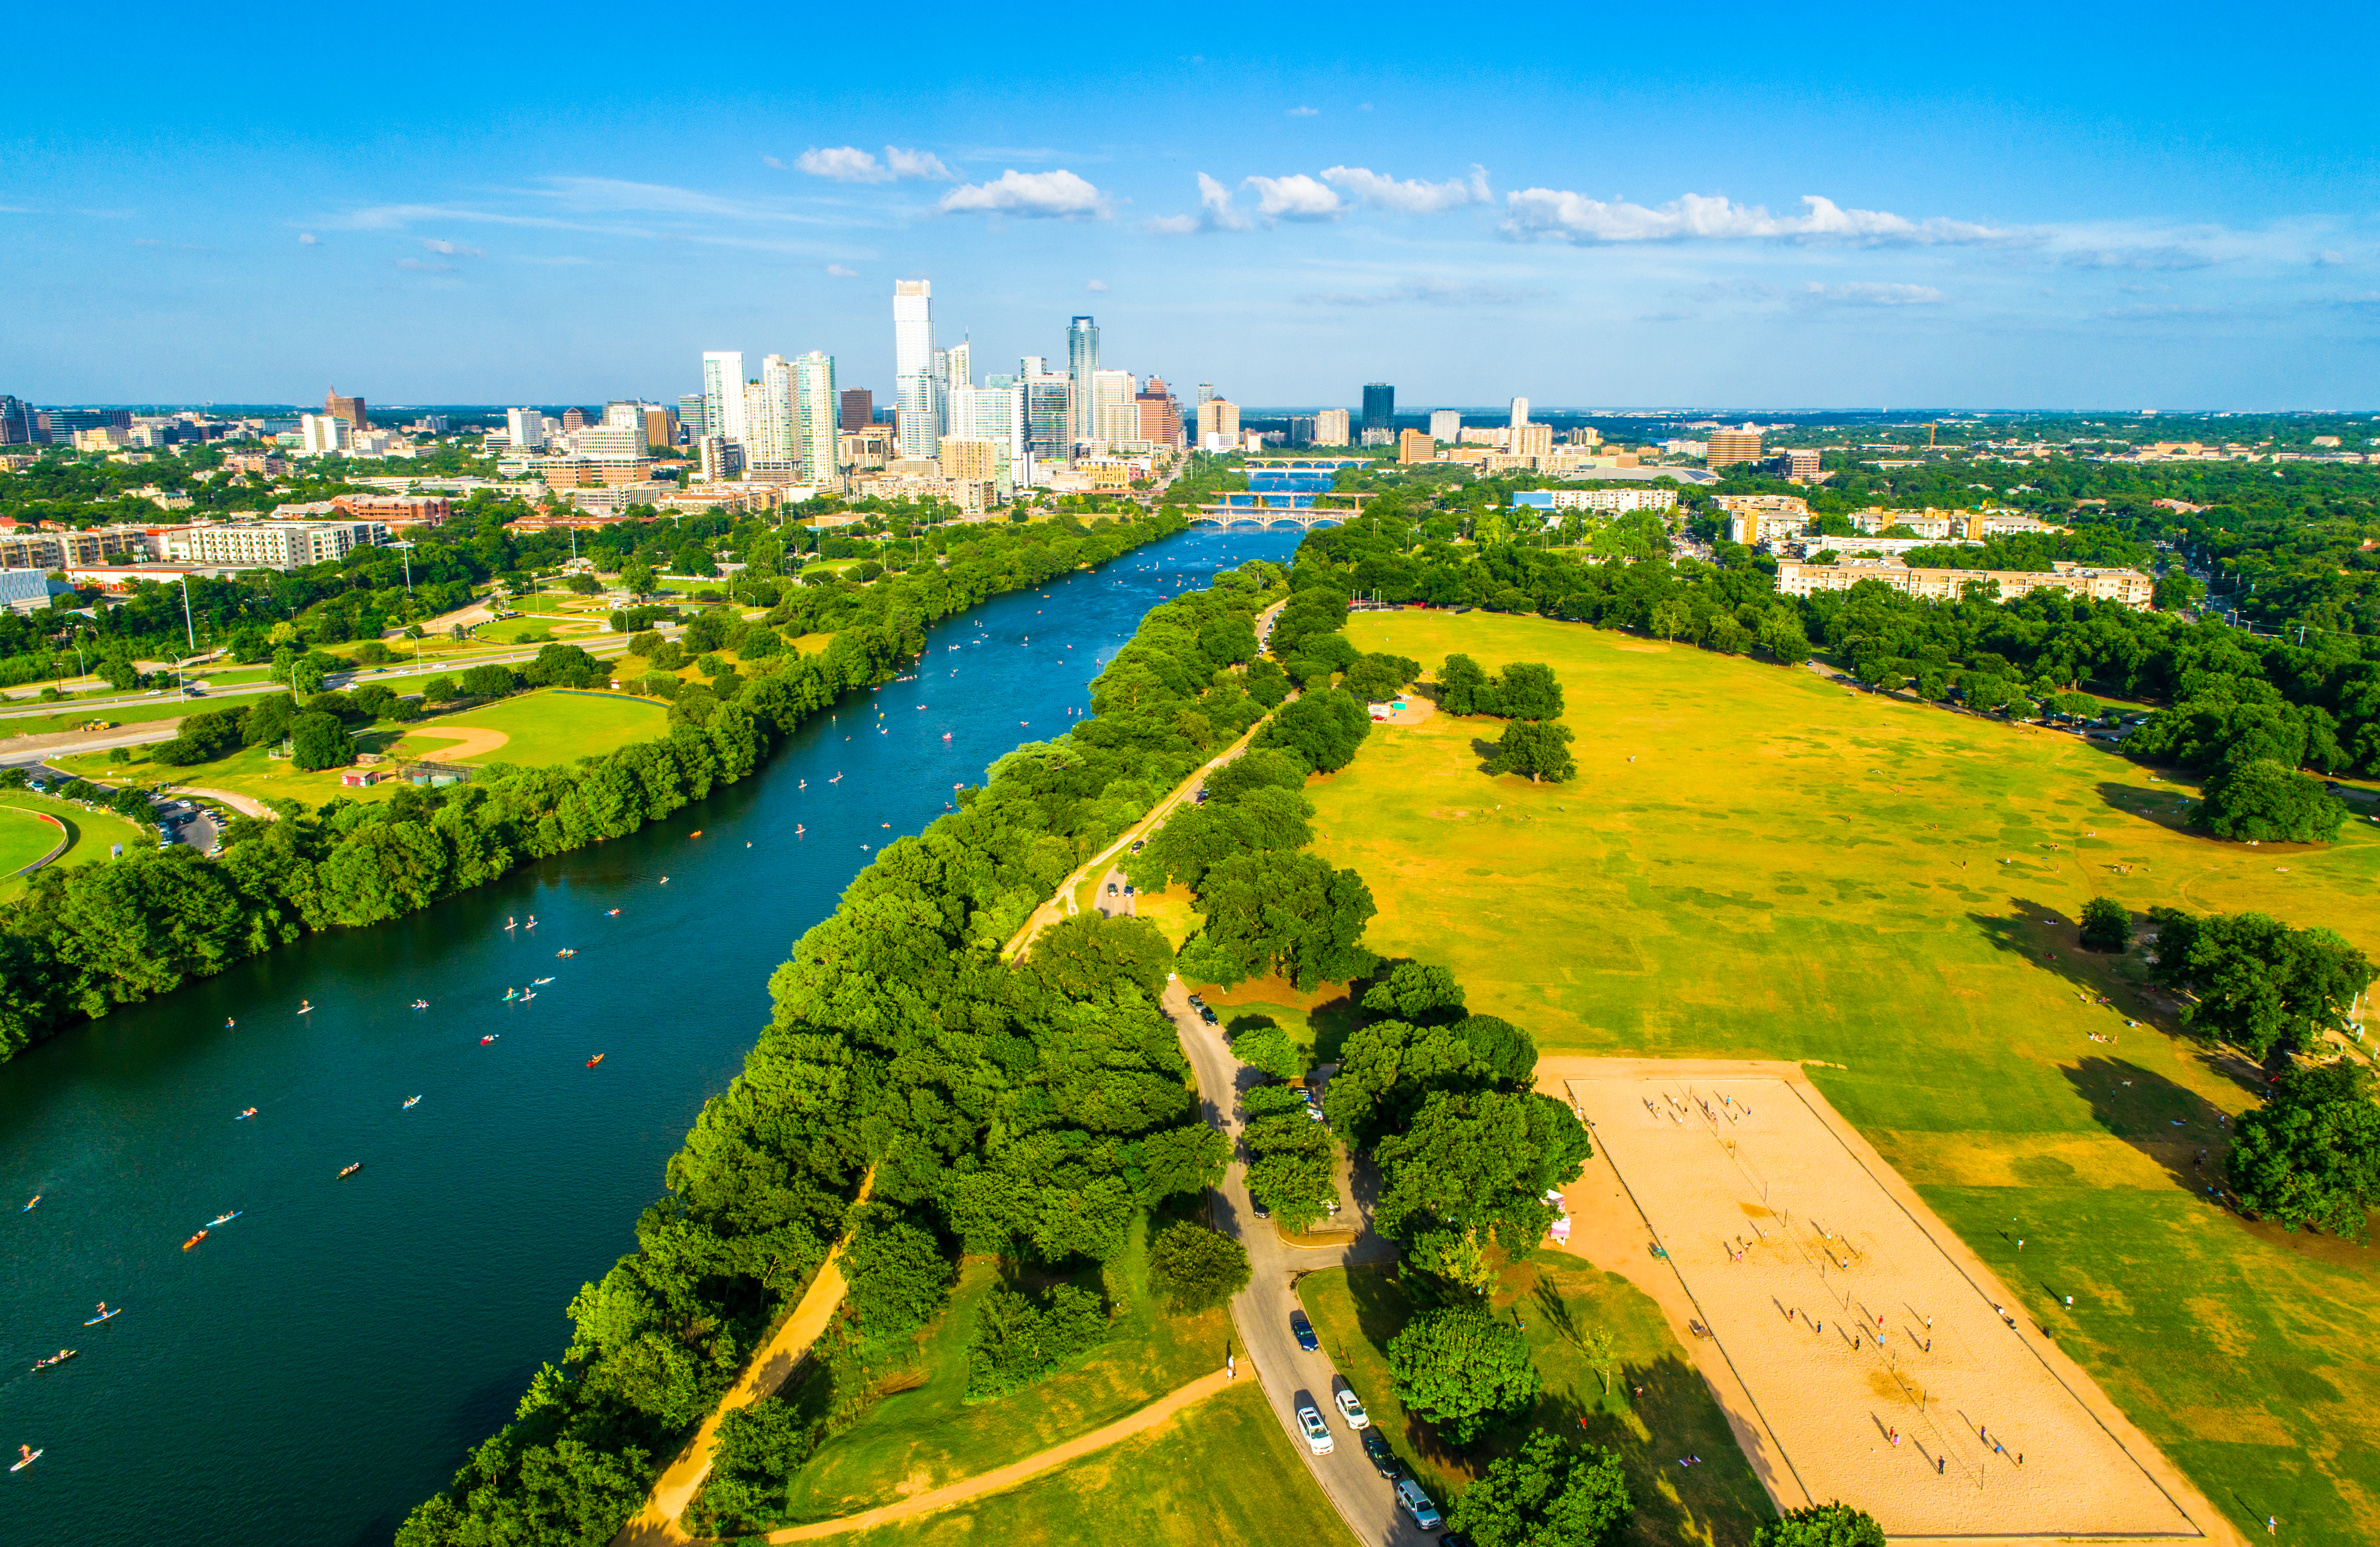 2019 aerial drone view above Austin, Texas — Zilker Park, Lady Bird Lake, and skyline (Getty Images/ RoschetzkyIstockPhoto)